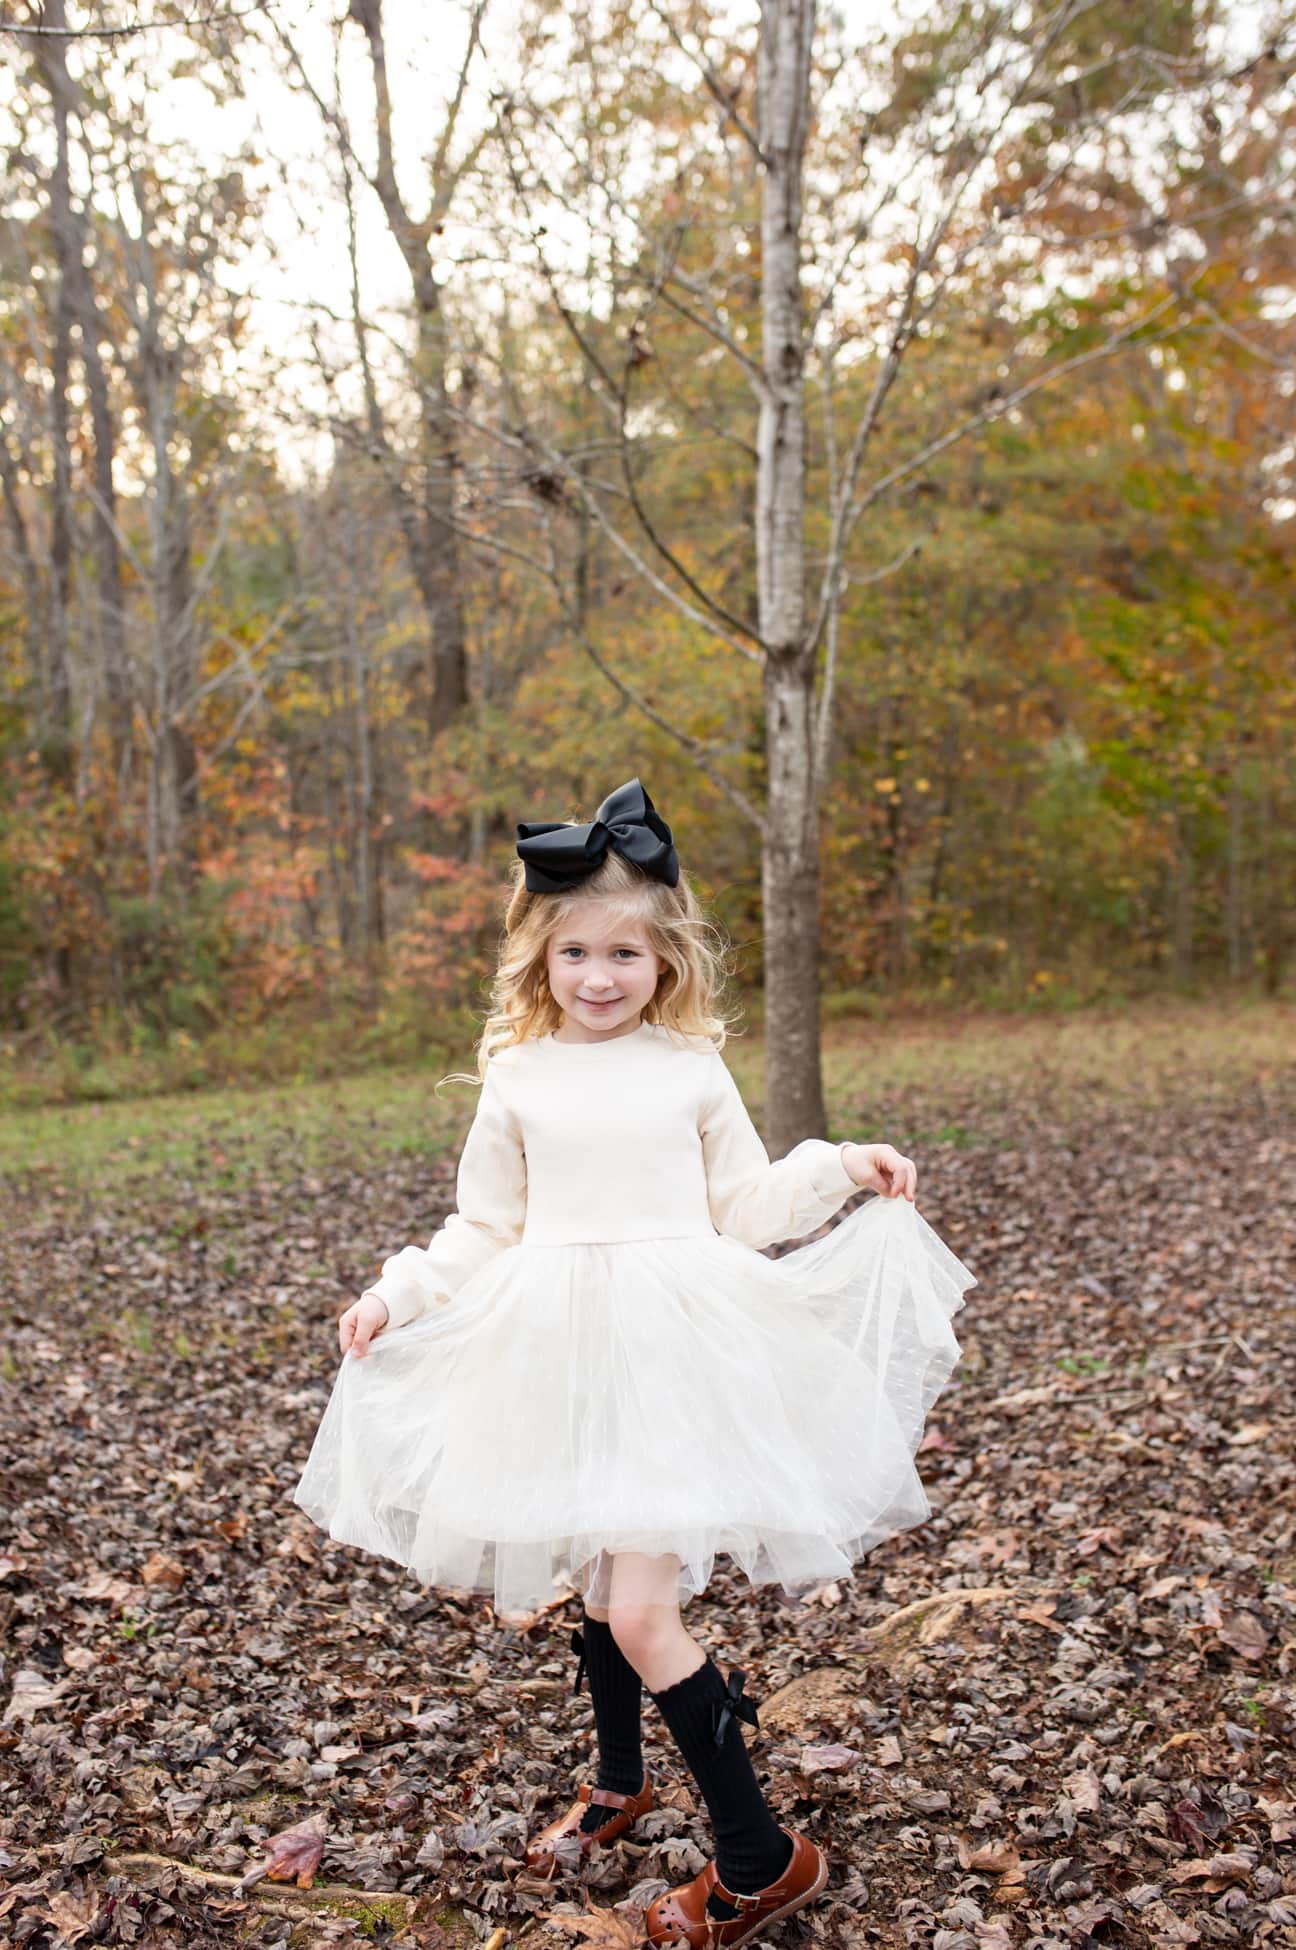 cute girls showing off her white dress and black bow during a fall photo session in a park in Wake Forest, NC